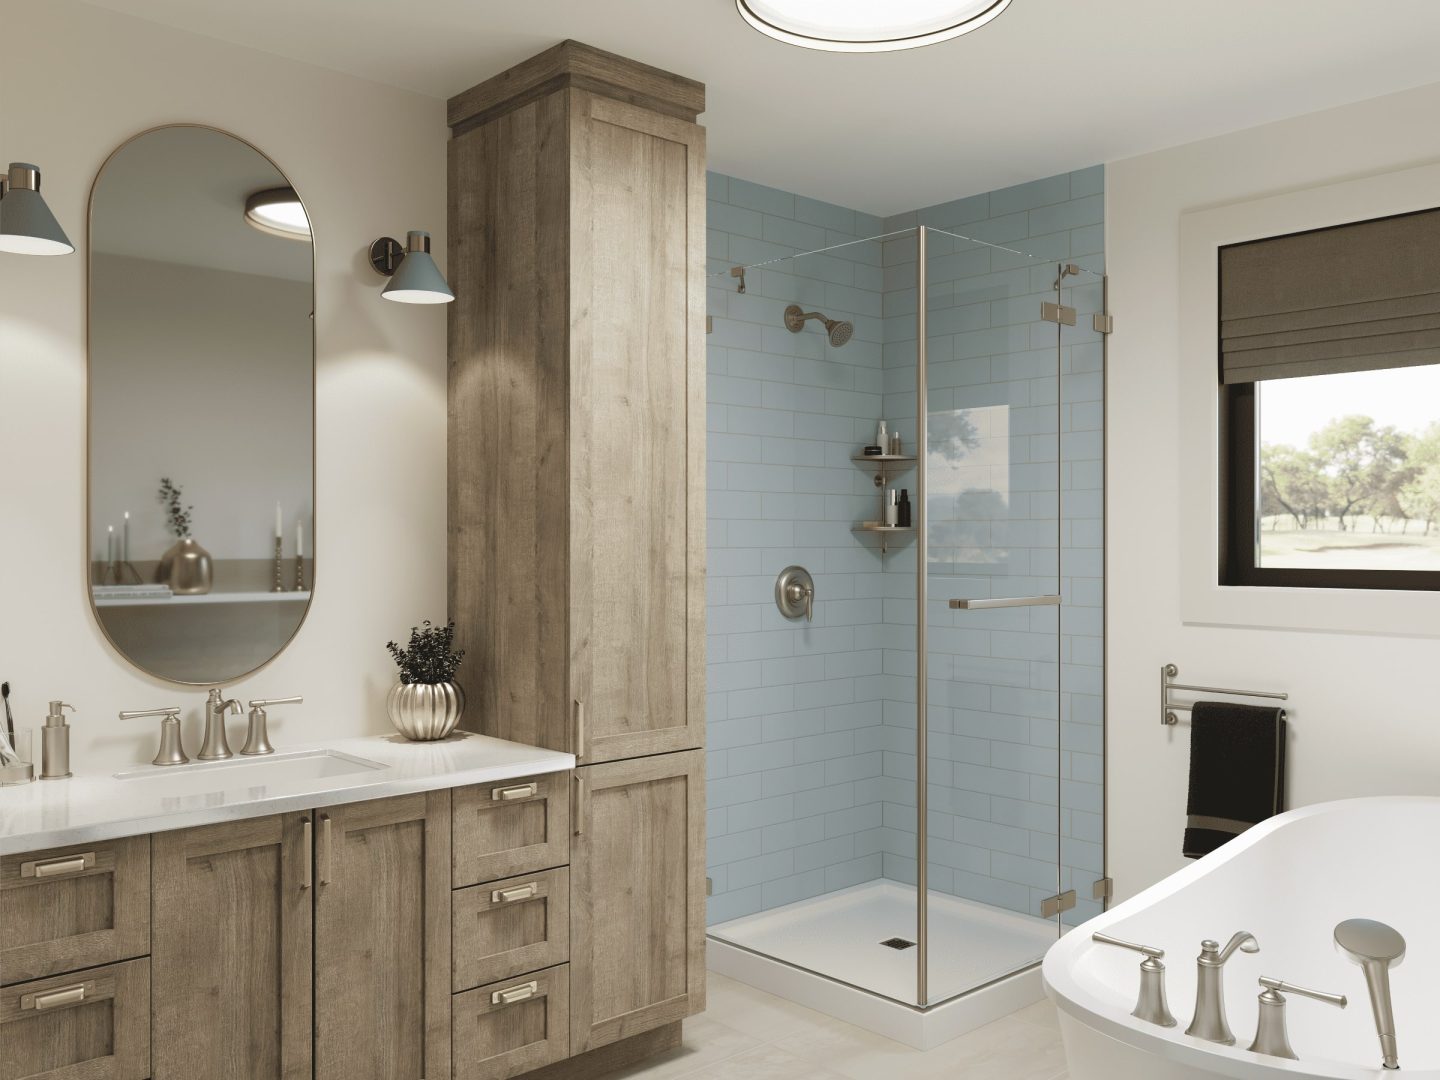 Emeraude model, a single-storey home in the Classic style. View of the bathroom